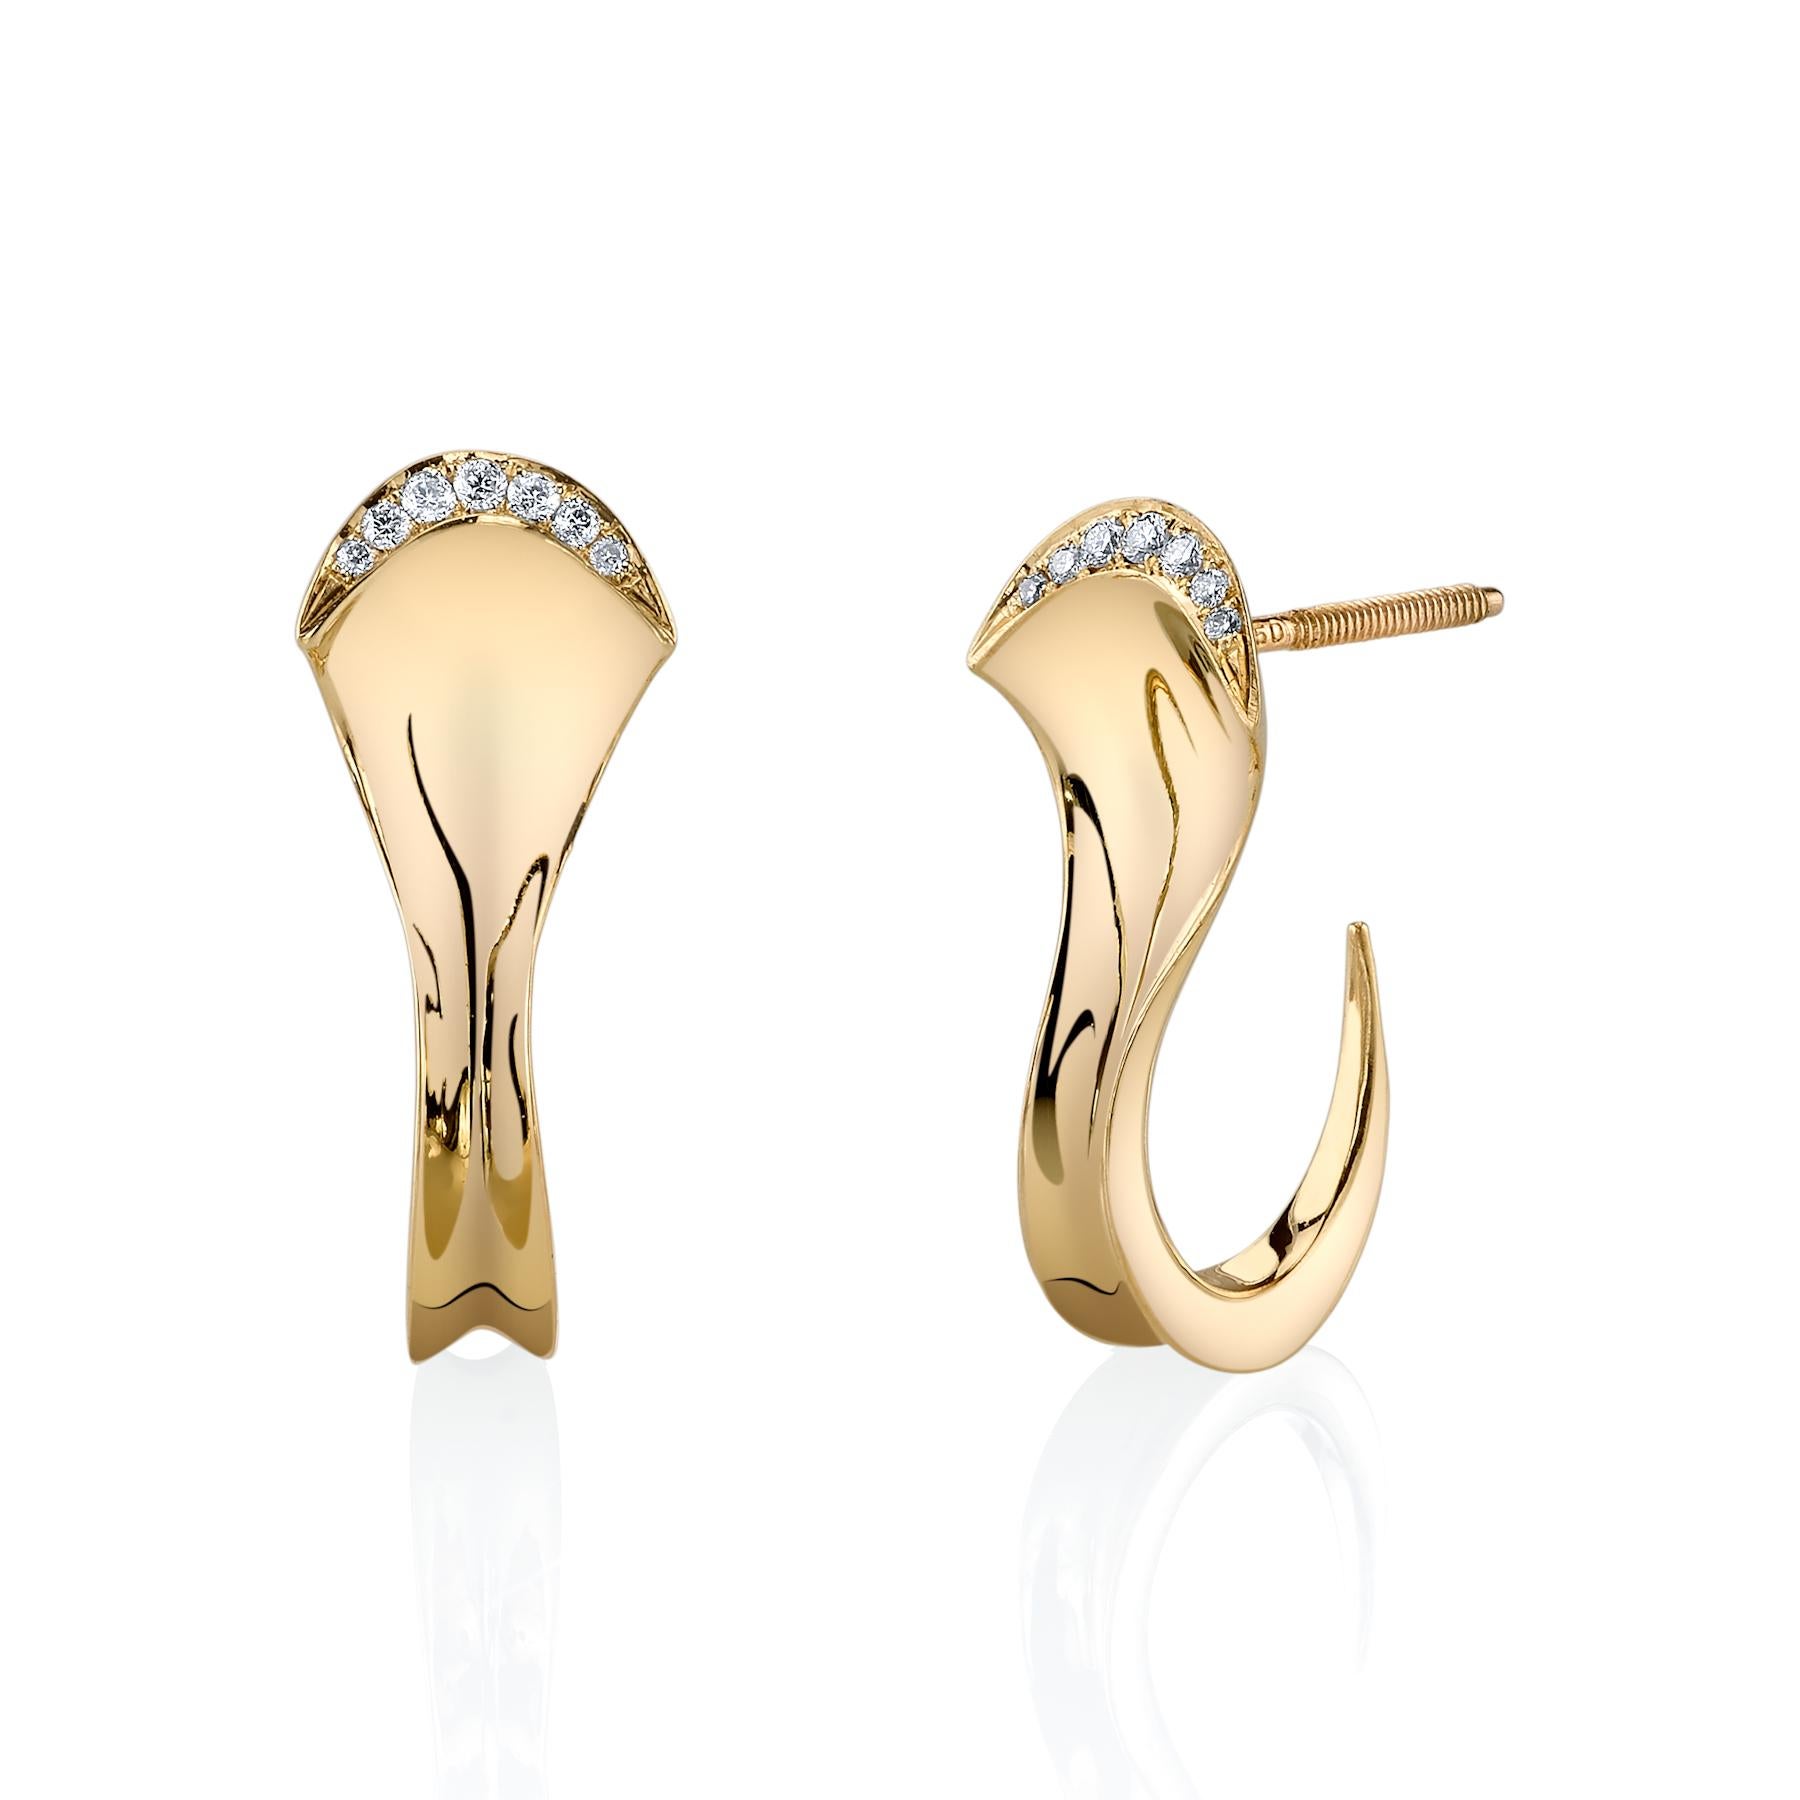 Sculptural Contemporary, Couture 18K Gold Earrings with Natural White Diamonds For Sale 3